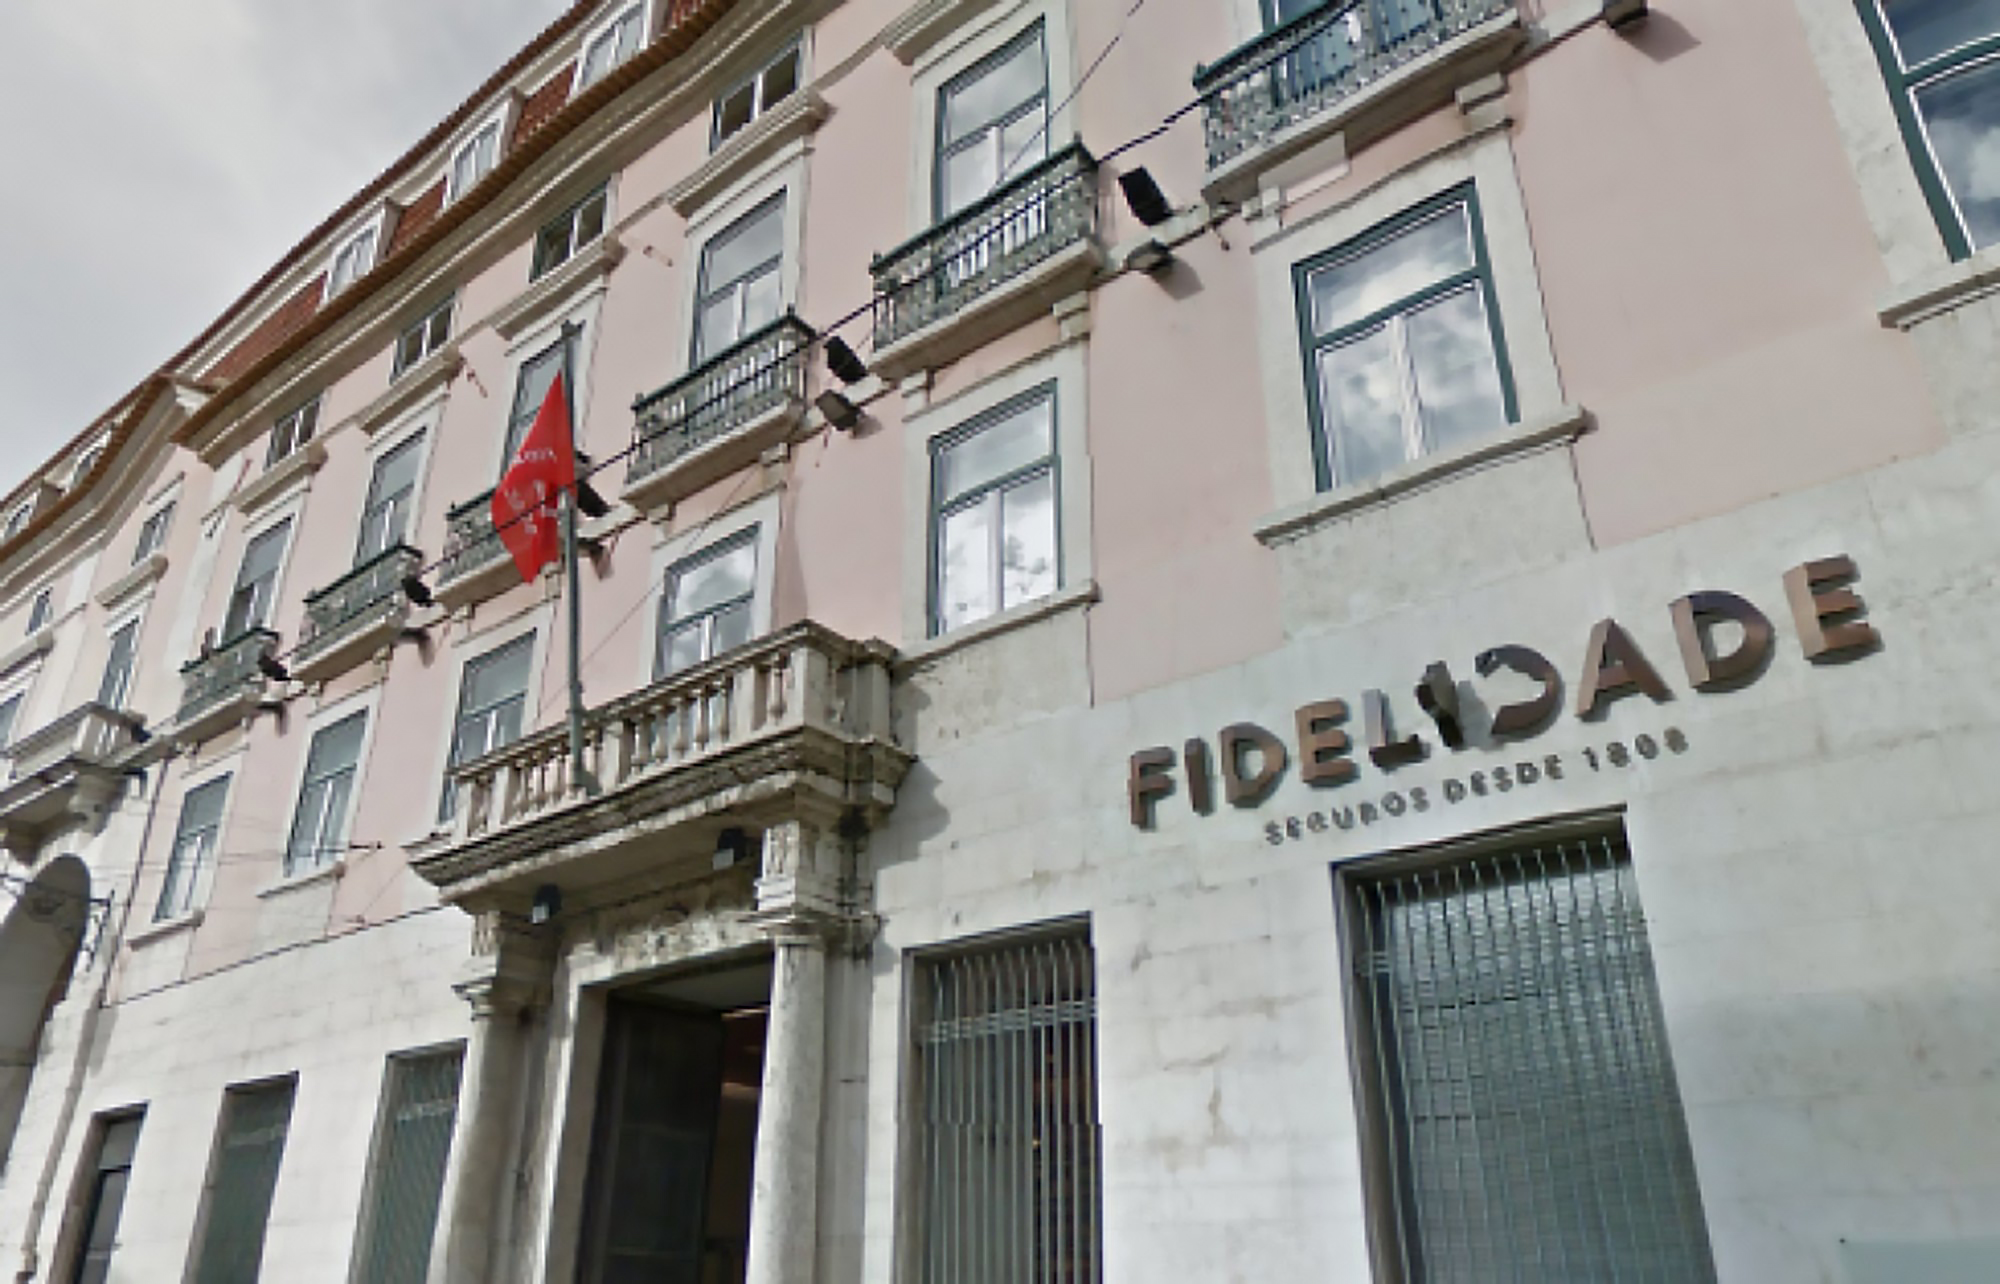 Fosun’s Fidelidade pays 46.8 million euros for 70 per cent of Mozambican insurance company SIM